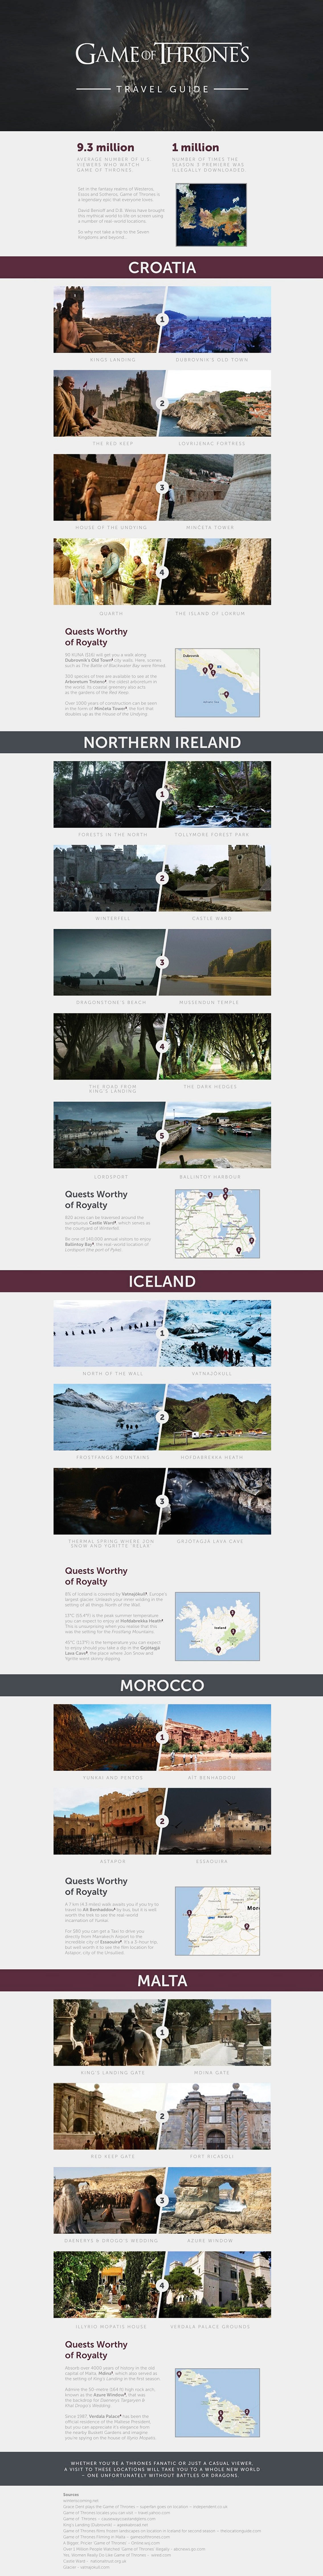 Game of Thrones Travel Guide Infographic